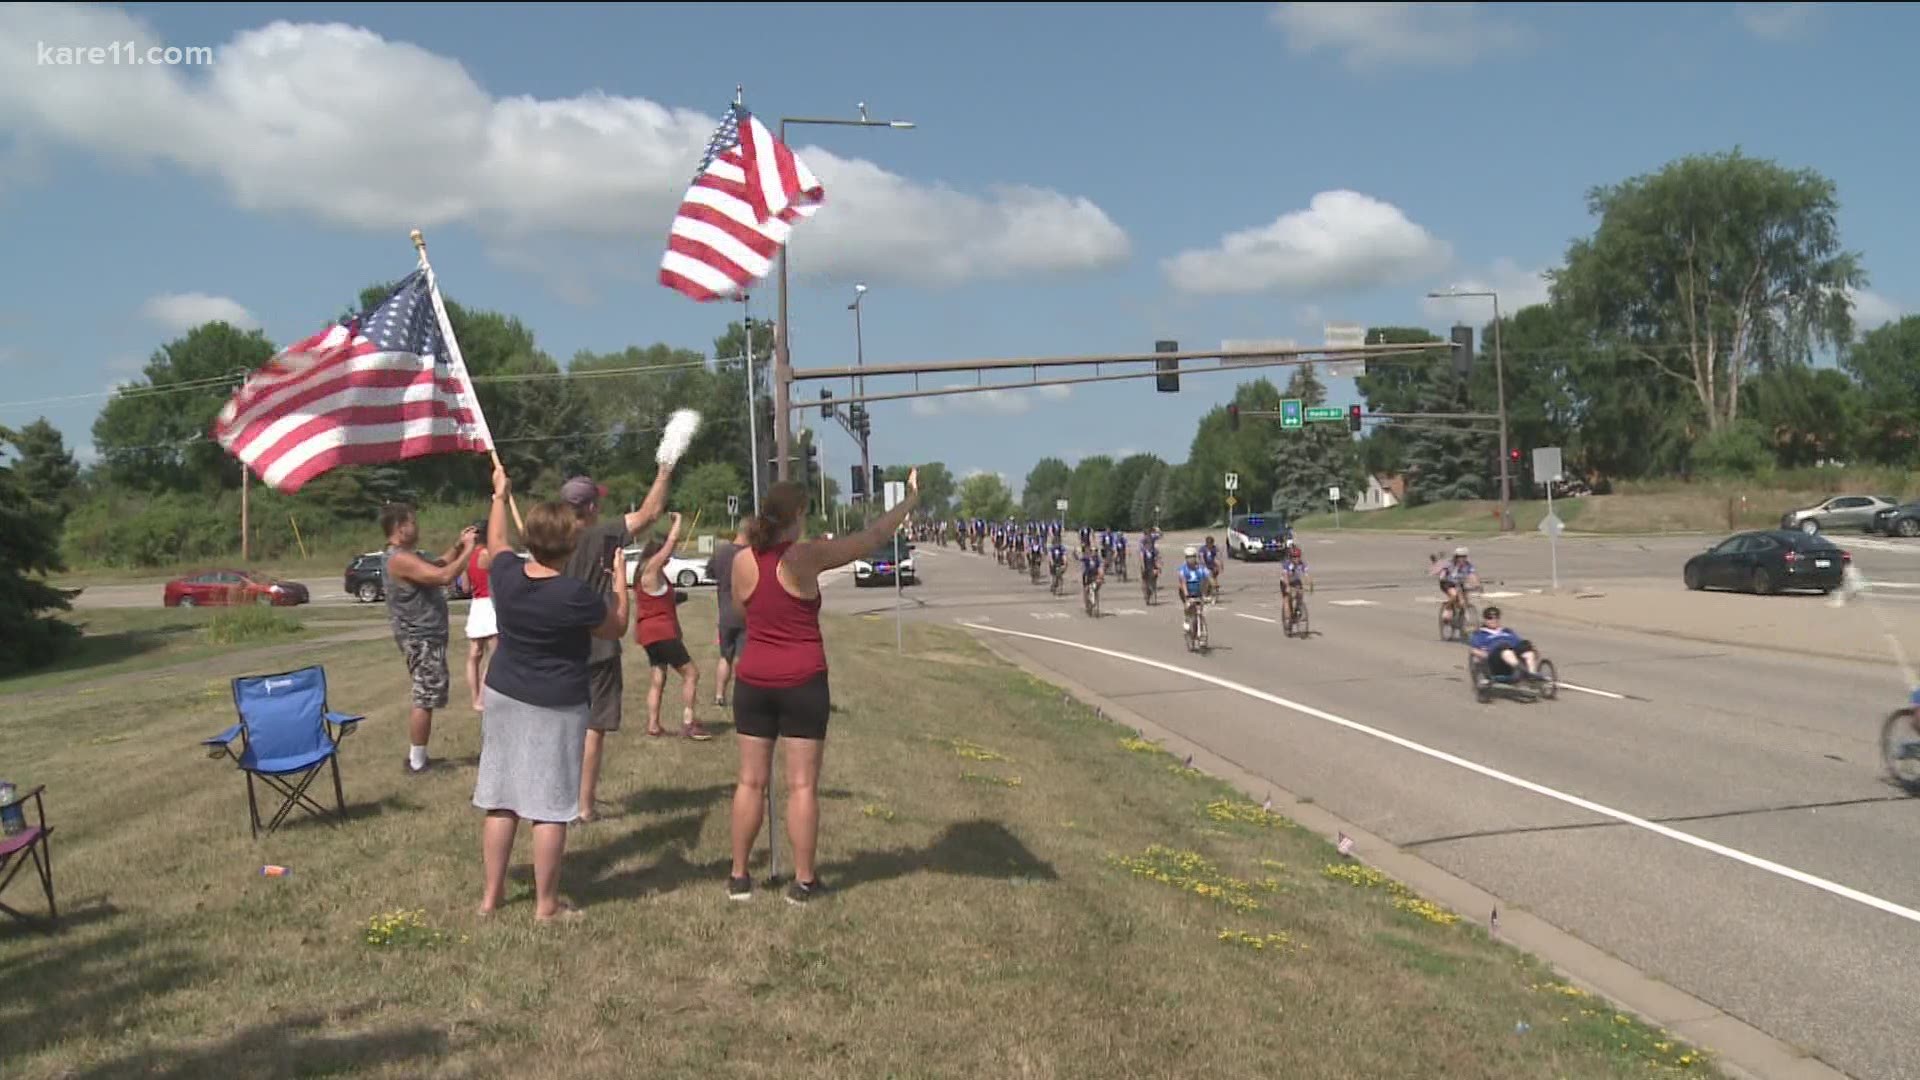 Veterans participating in the Wounded Warriors event rode nearly 17 miles before stopping at a local fire station.